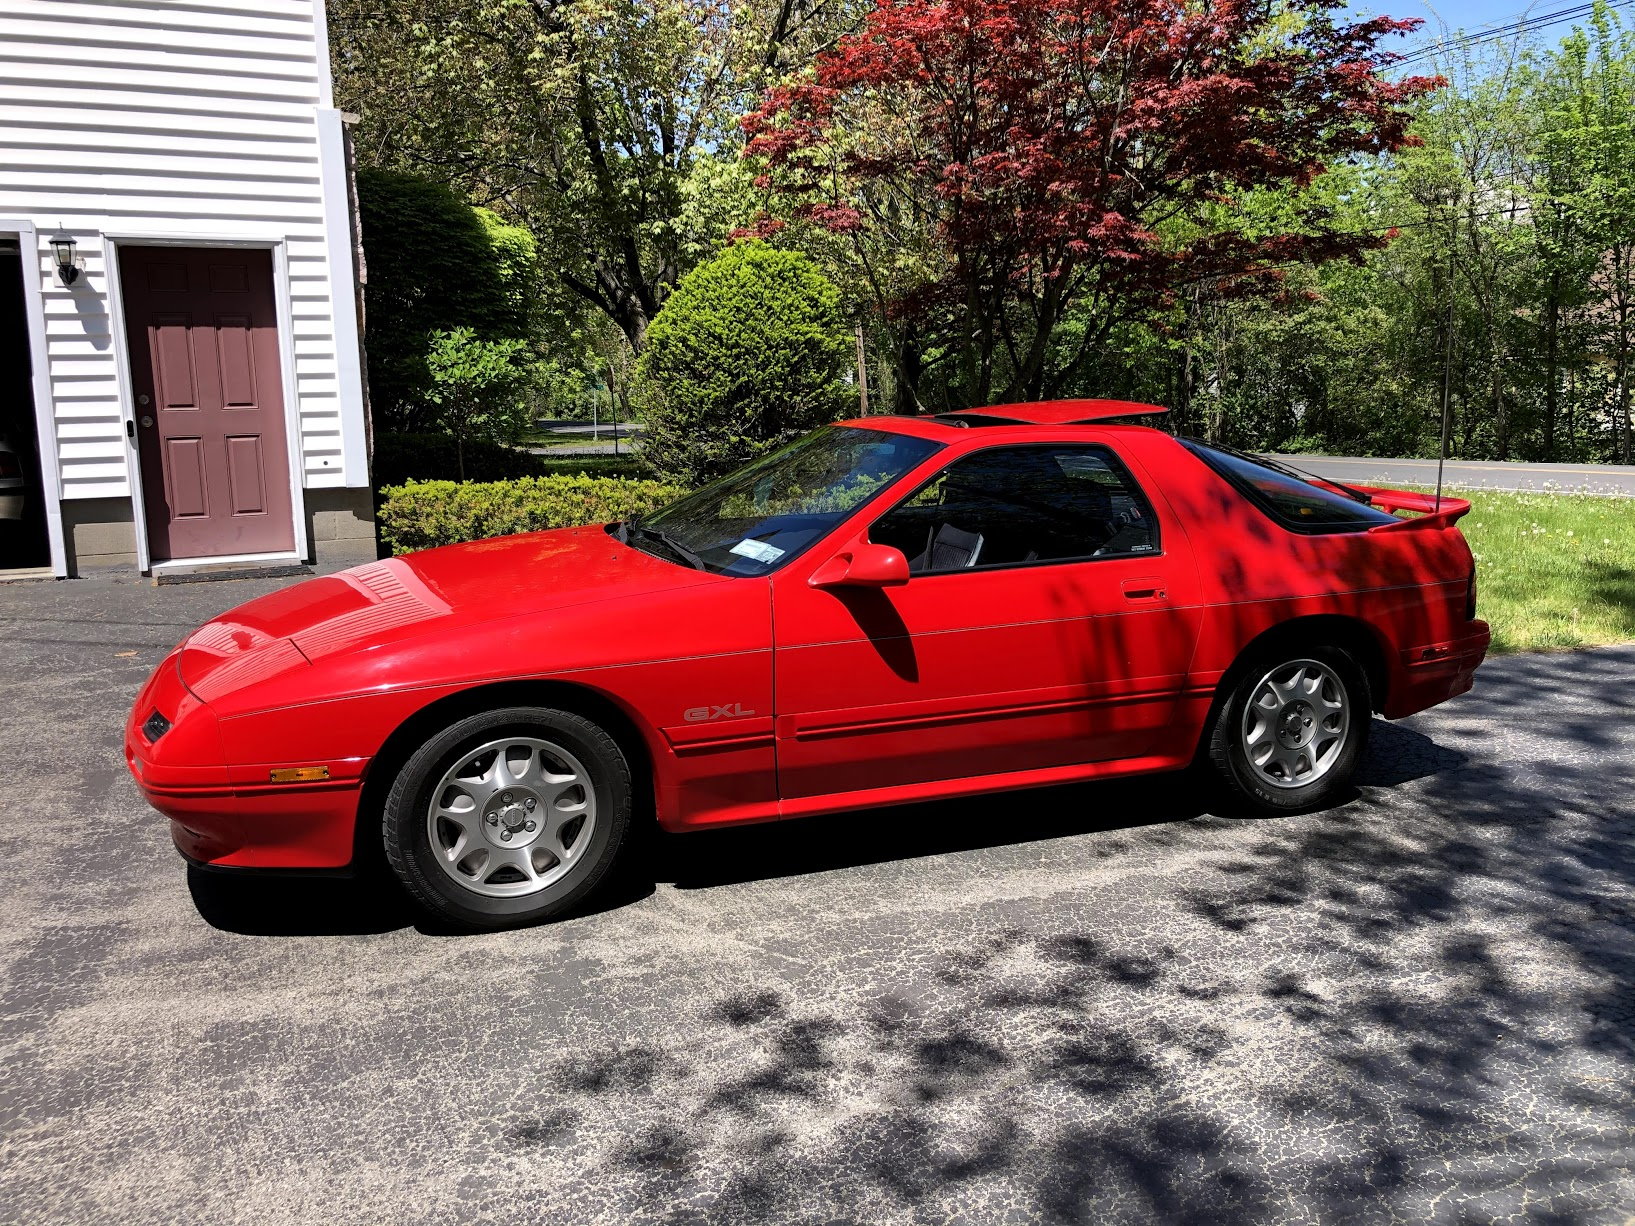 1990 Mazda RX-7 - 1990 Mazda RX-7 GXL w/18k original miles - $18,000 OBO - Used - VIN JM1FC3312L0802741 - 18,295 Miles - Other - 2WD - Manual - Coupe - Red - Schenectady, NY 12309, United States